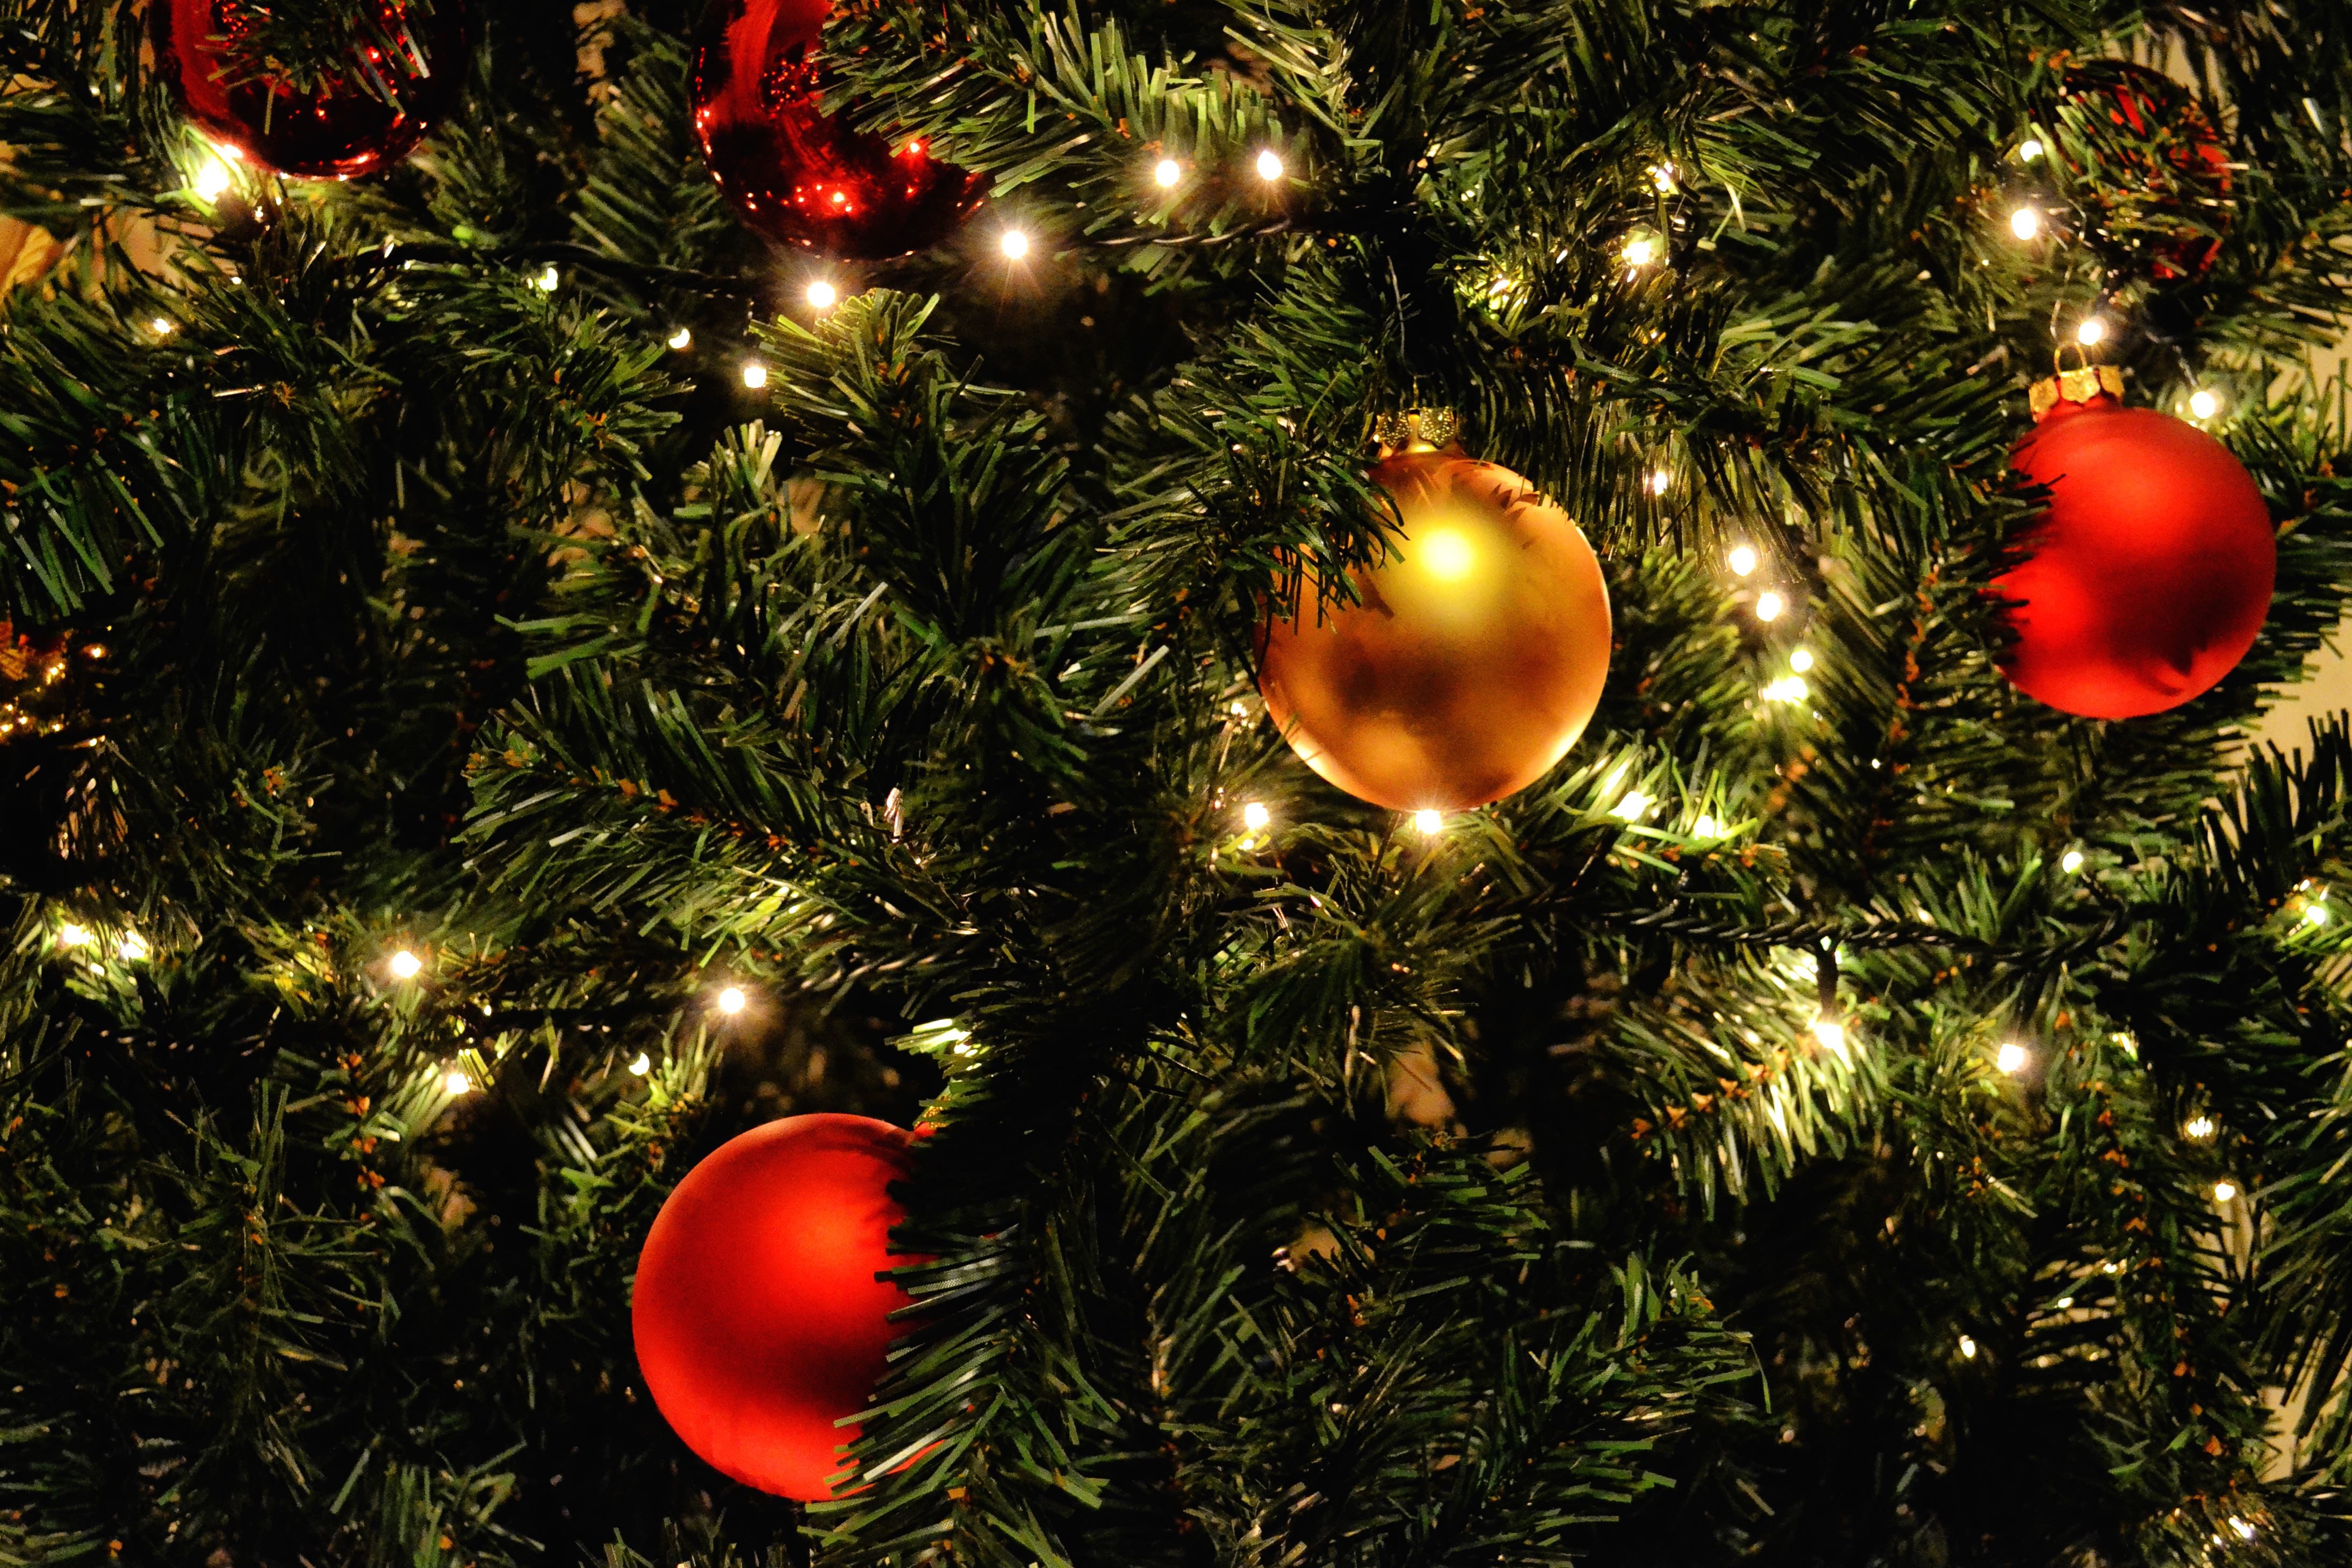 Free picture: decoration, sphere, spruce tree, Christmas 